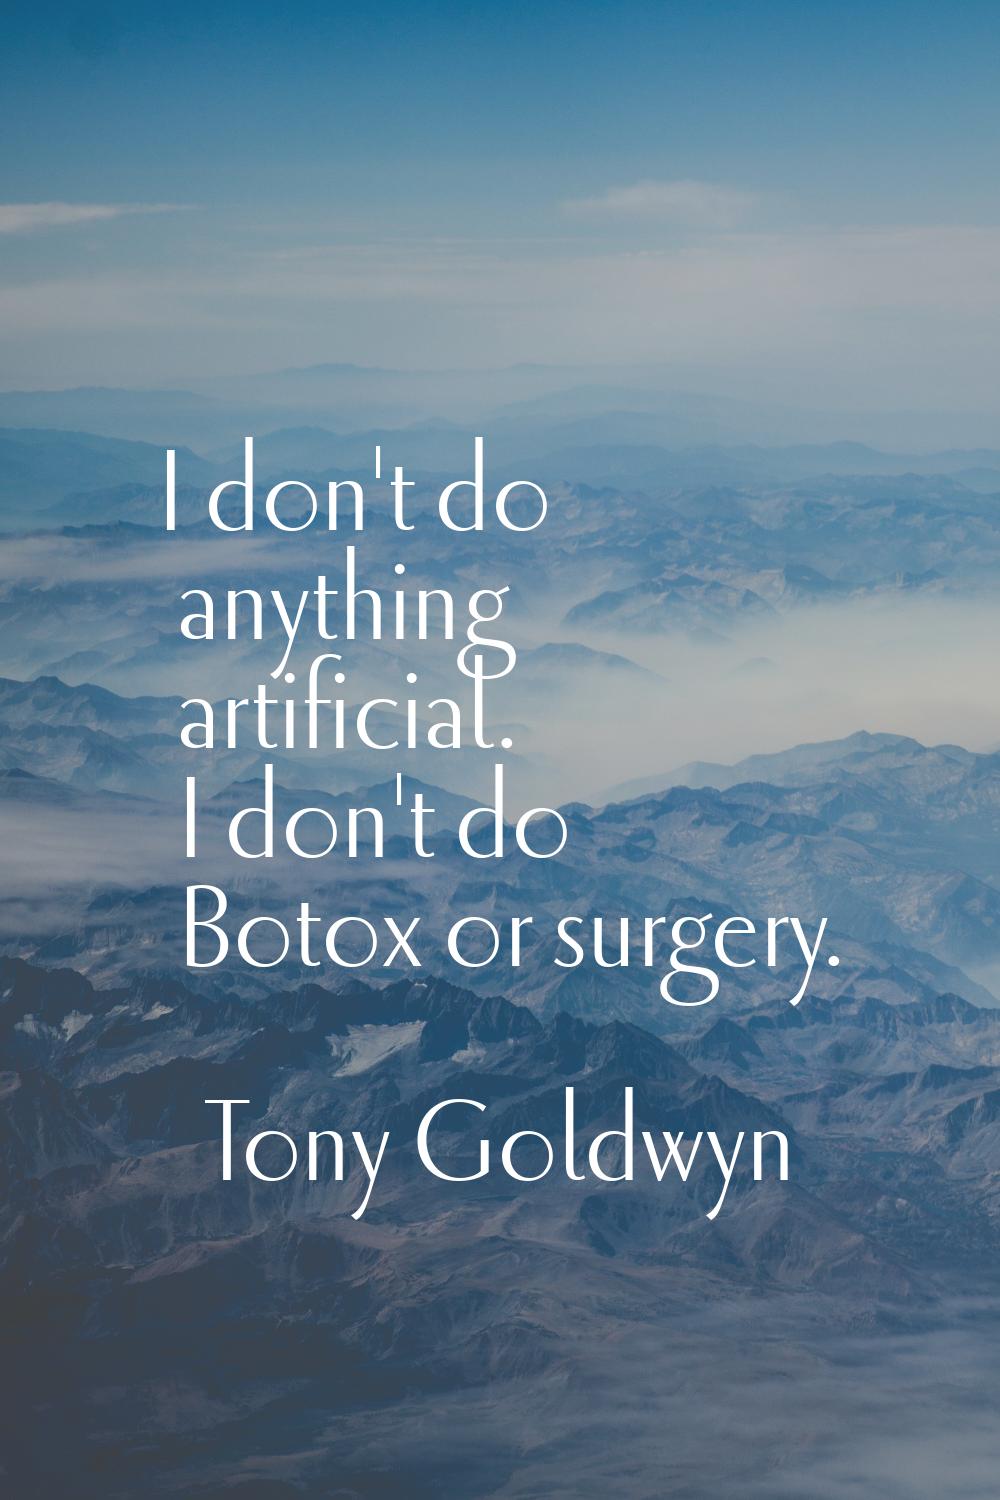 I don't do anything artificial. I don't do Botox or surgery.